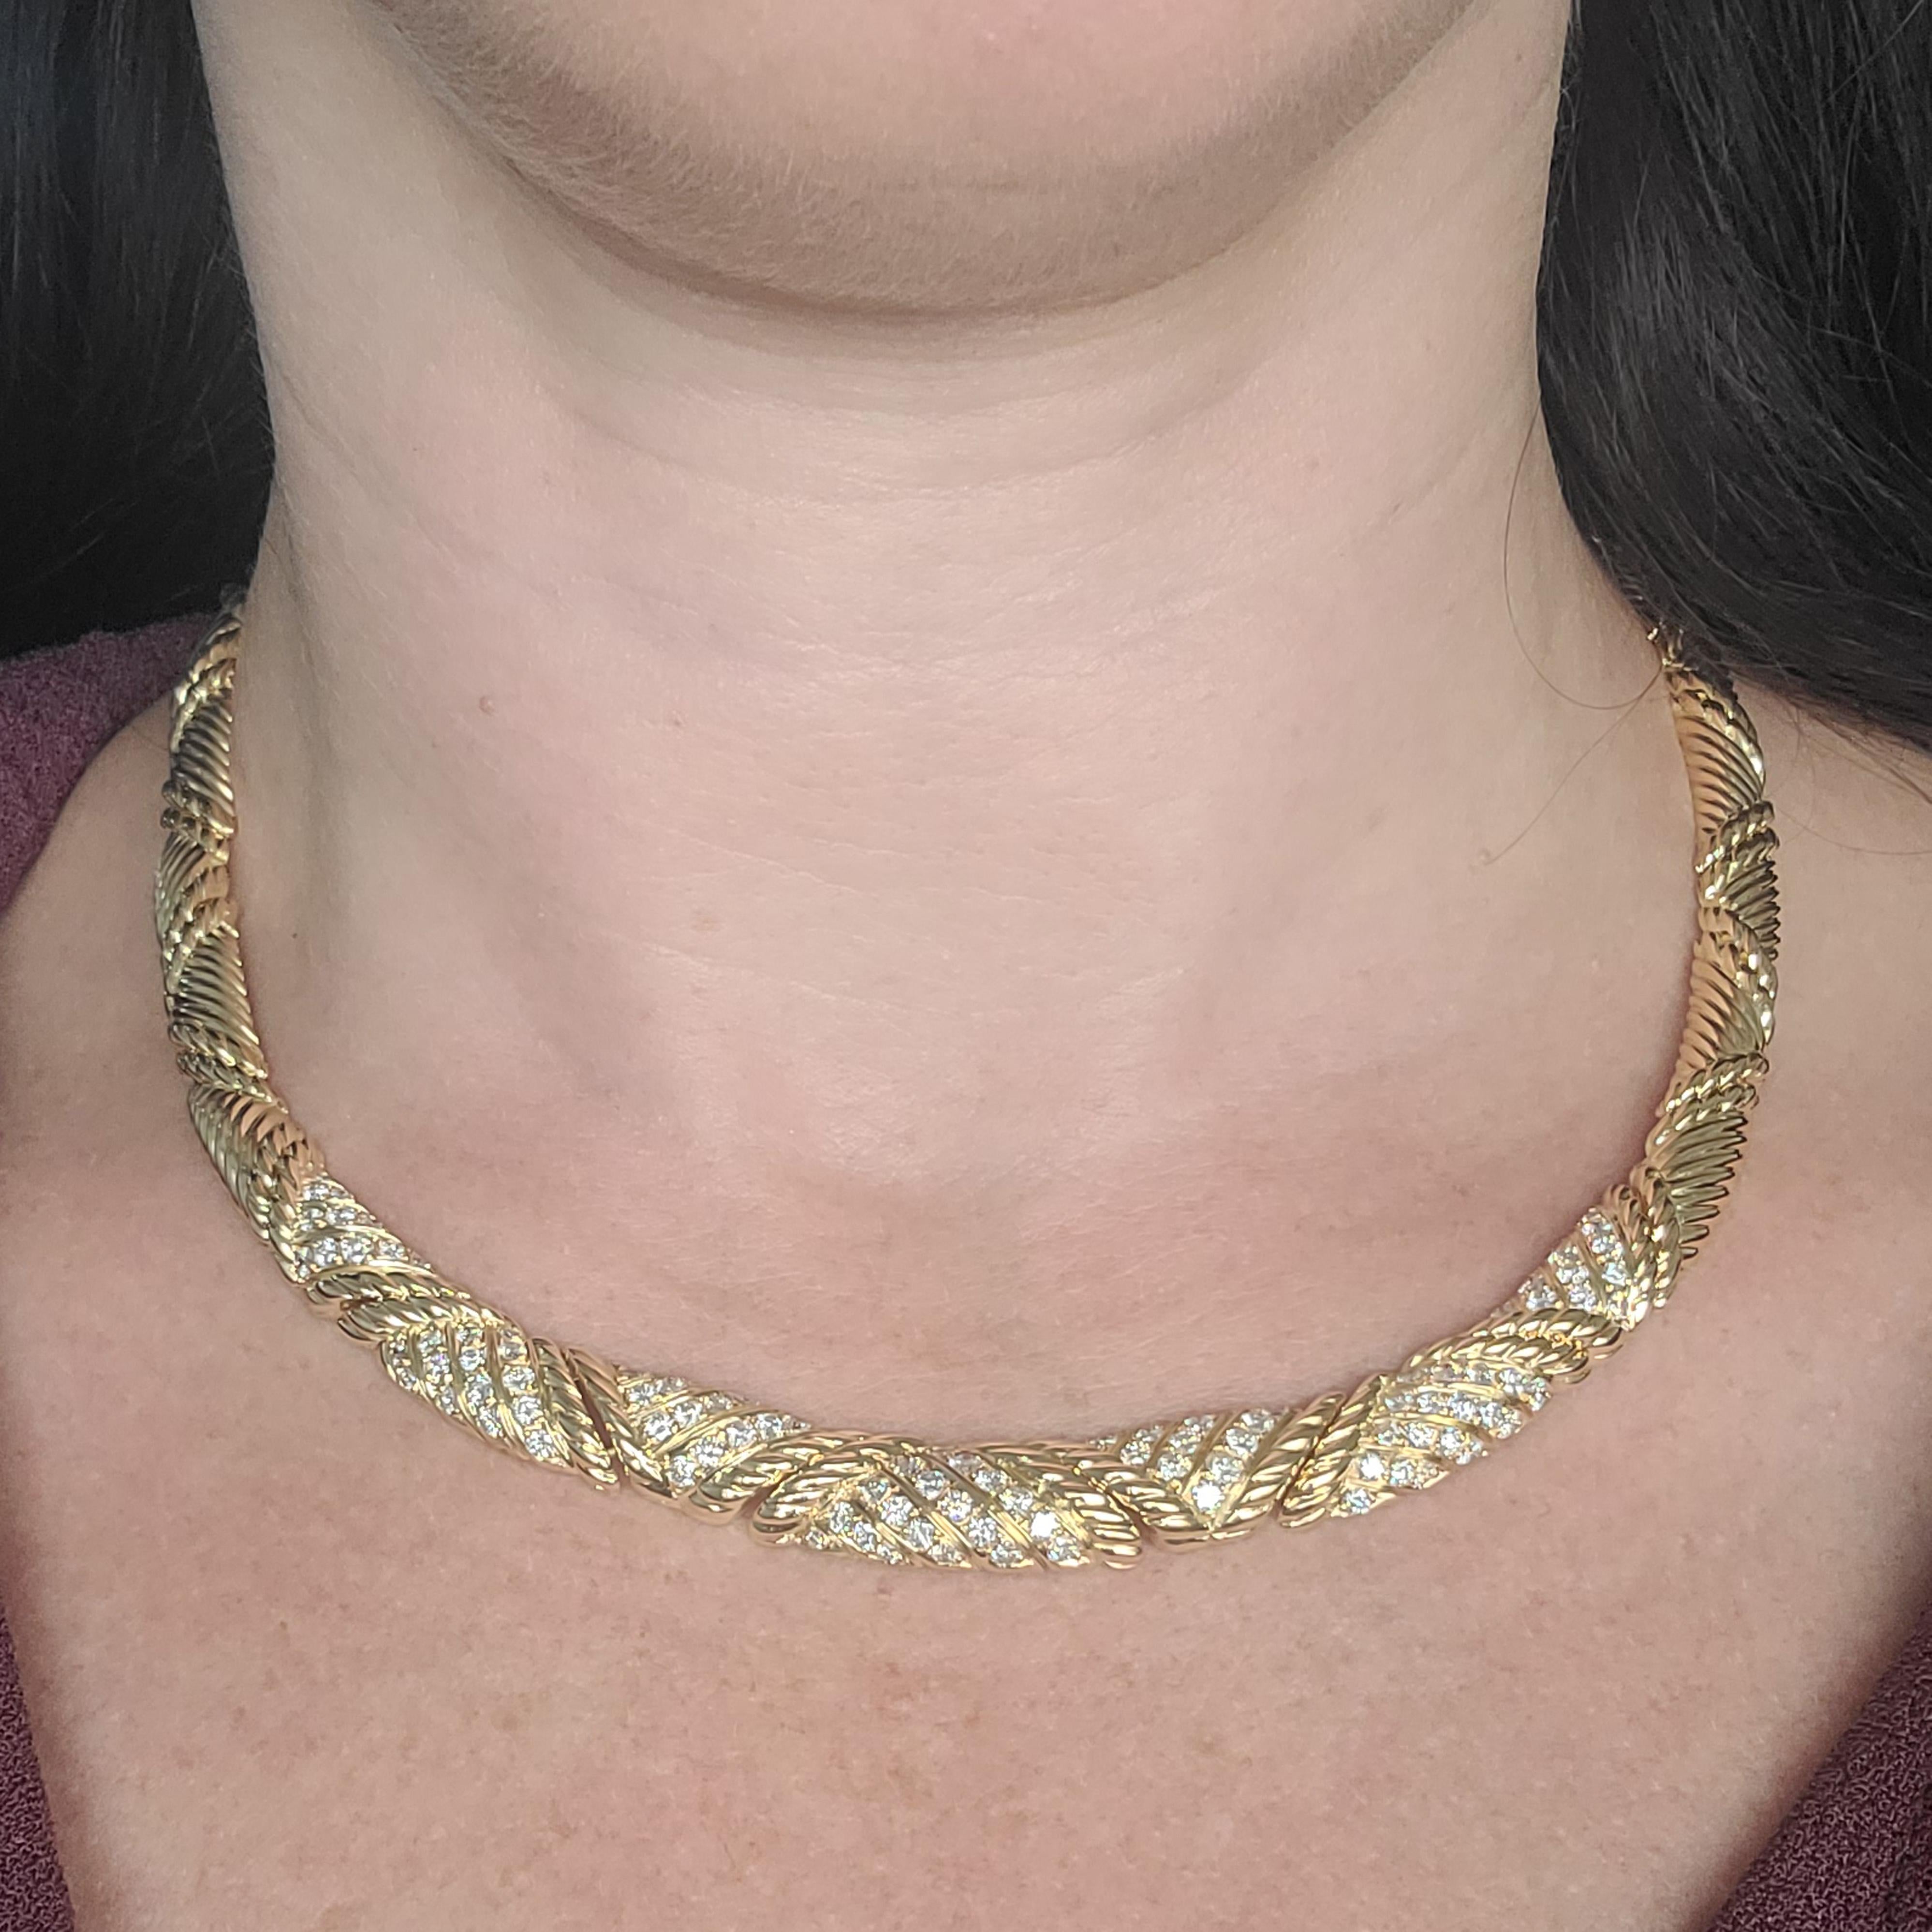 Heavy 18 Karat Yellow Gold Carved Collar Necklace Featuring 100 Round Brilliant Cut Diamonds of VS Clarity and G/H Color Totaling Approximately 3.00 Carats. 16 Inches Long With Hidden Clasp and Safety. Finished Weight Is 61.3 Grams.